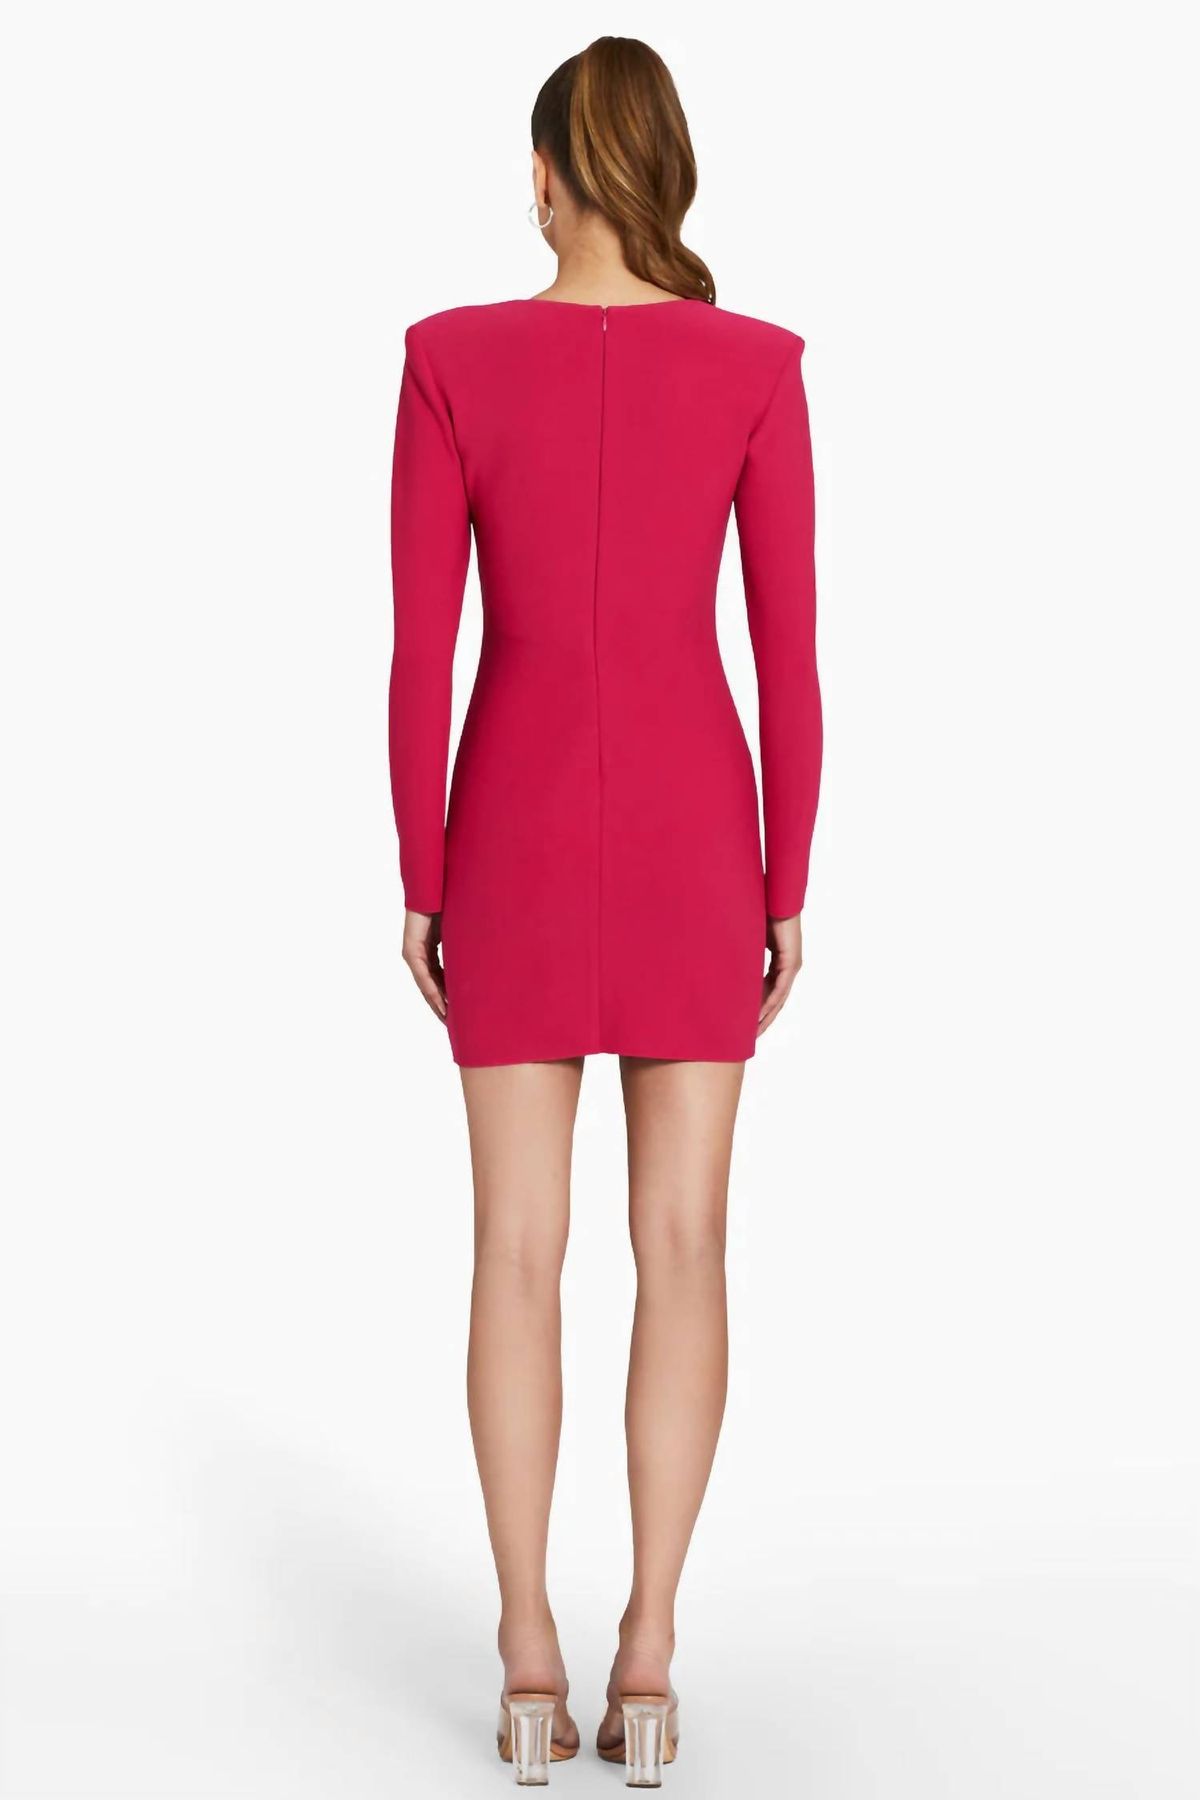 Style 1-3974888516-3236 Amanda Uprichard Size S Long Sleeve Red Cocktail Dress on Queenly